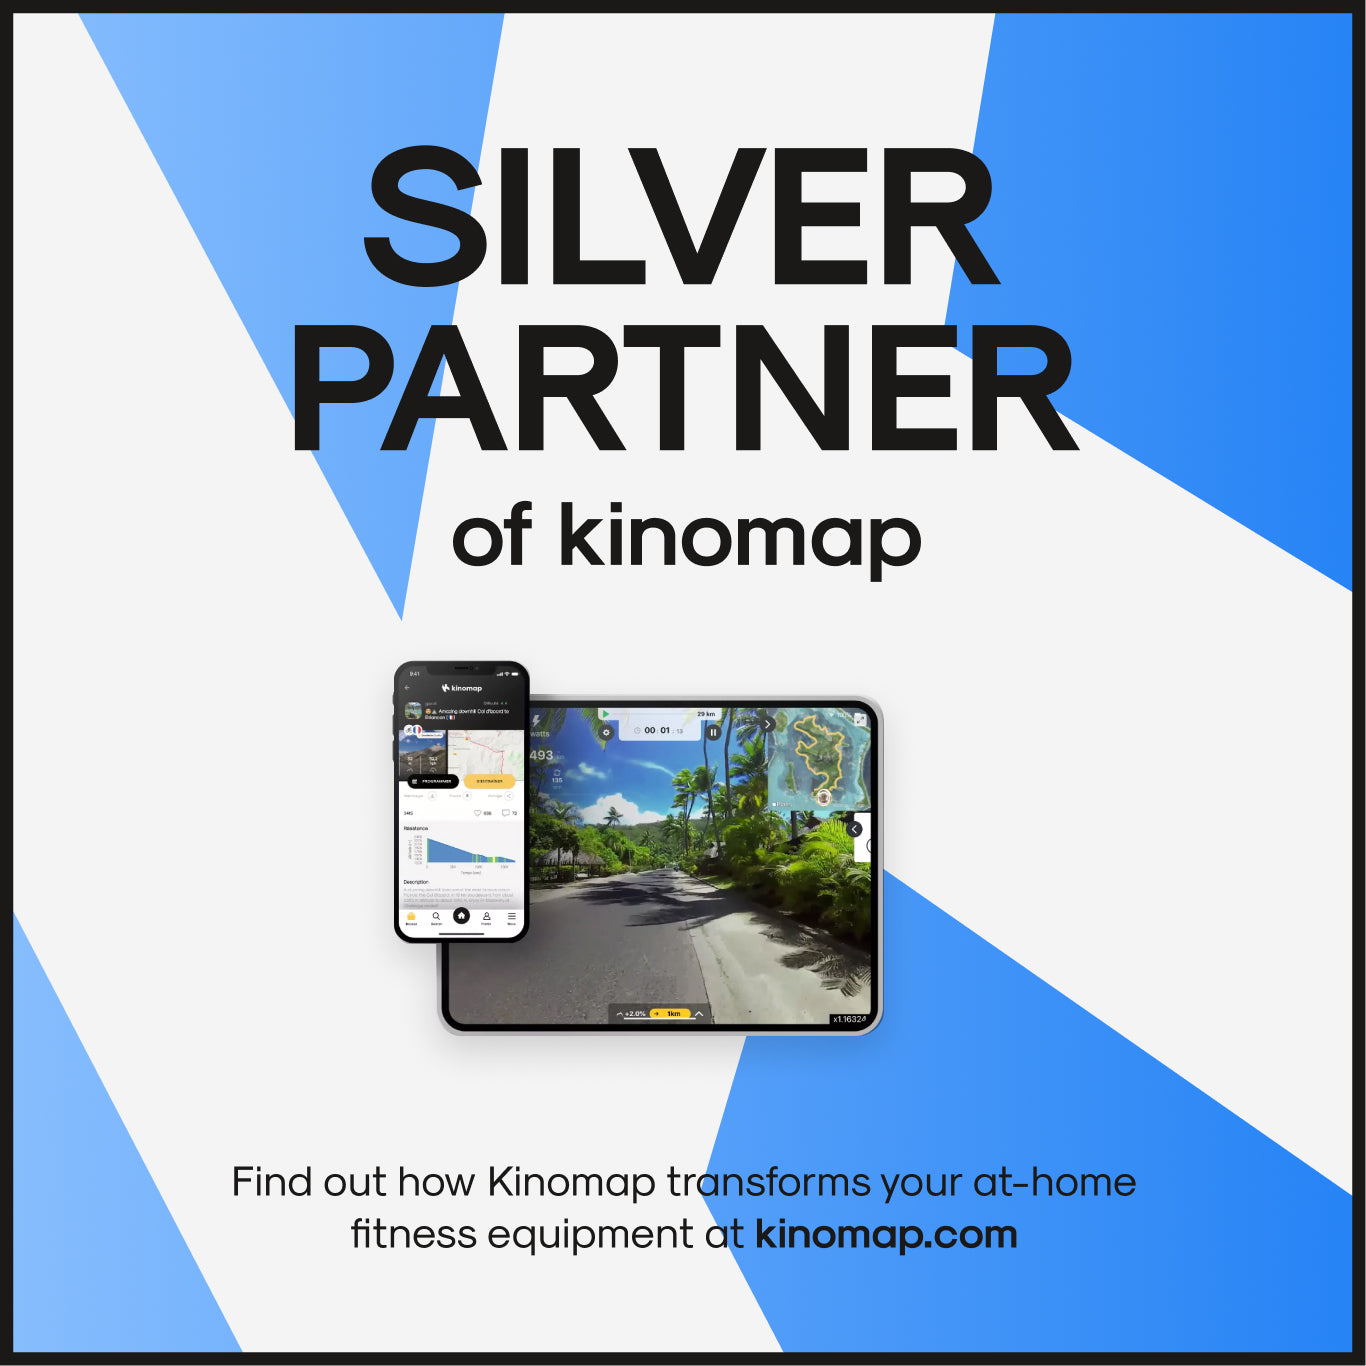 Image showcasing the Silver level partnership with NPE and Kinomap